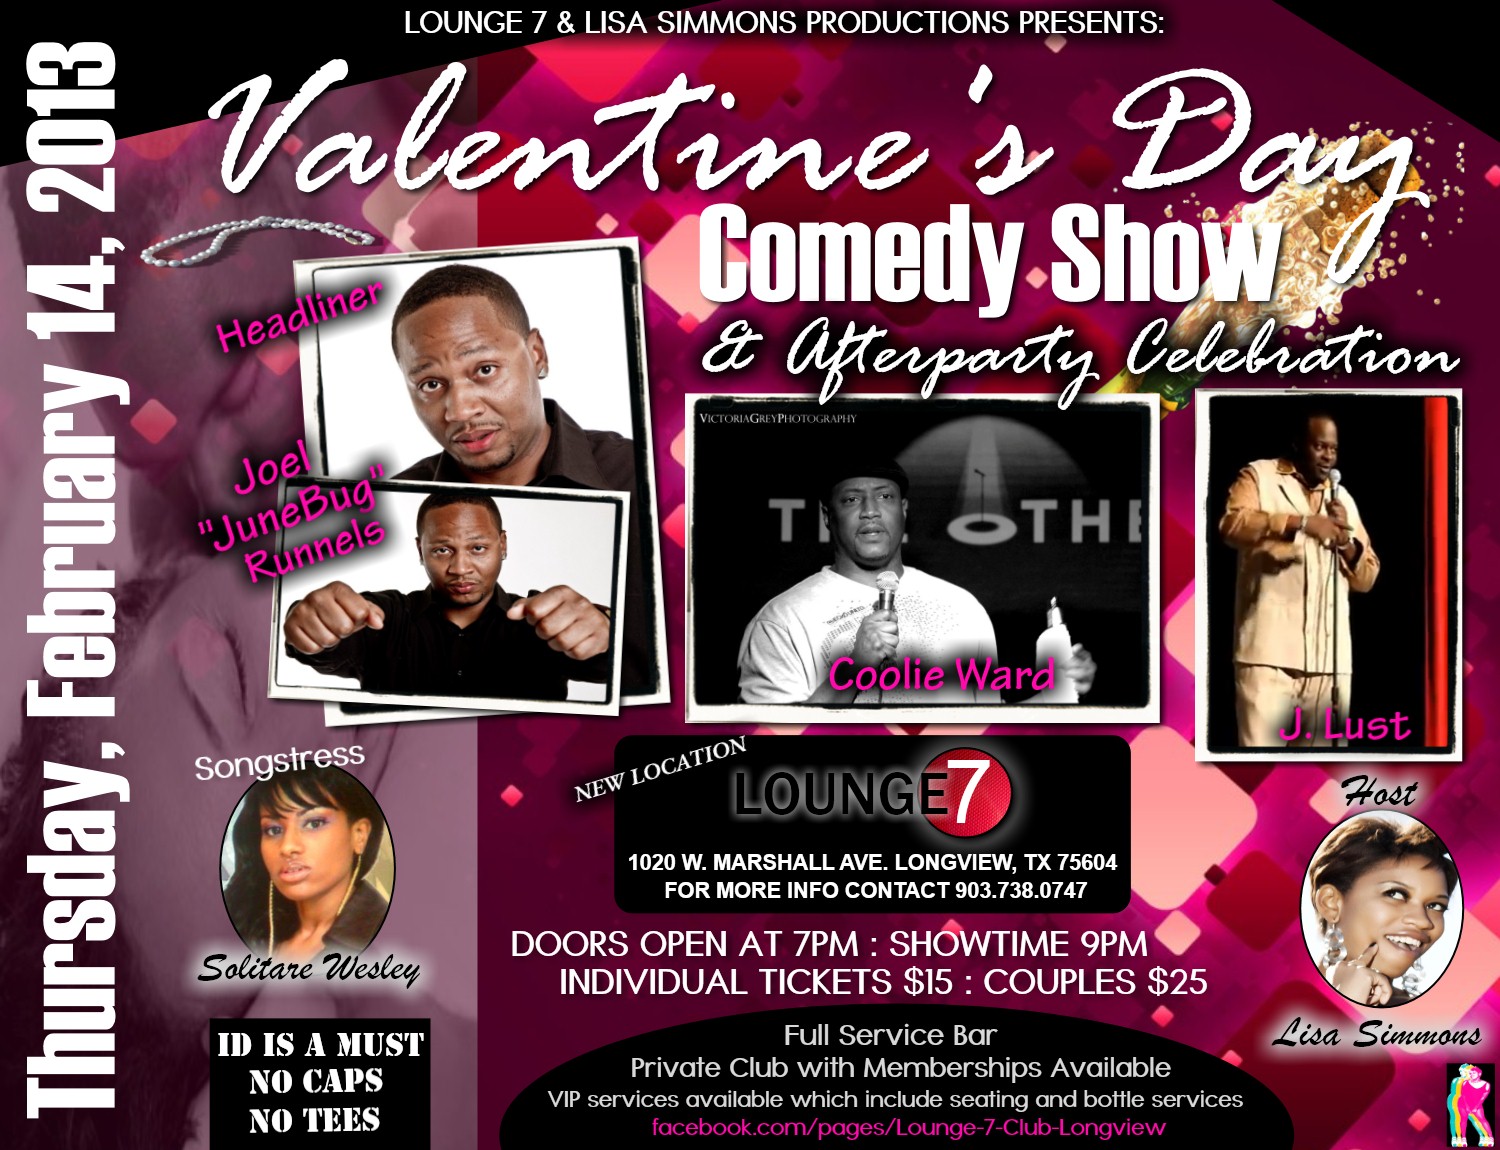 Lounge 7 Valentine's Day Comedy Show Tickets, Tue, Feb 12, 2013 at 700